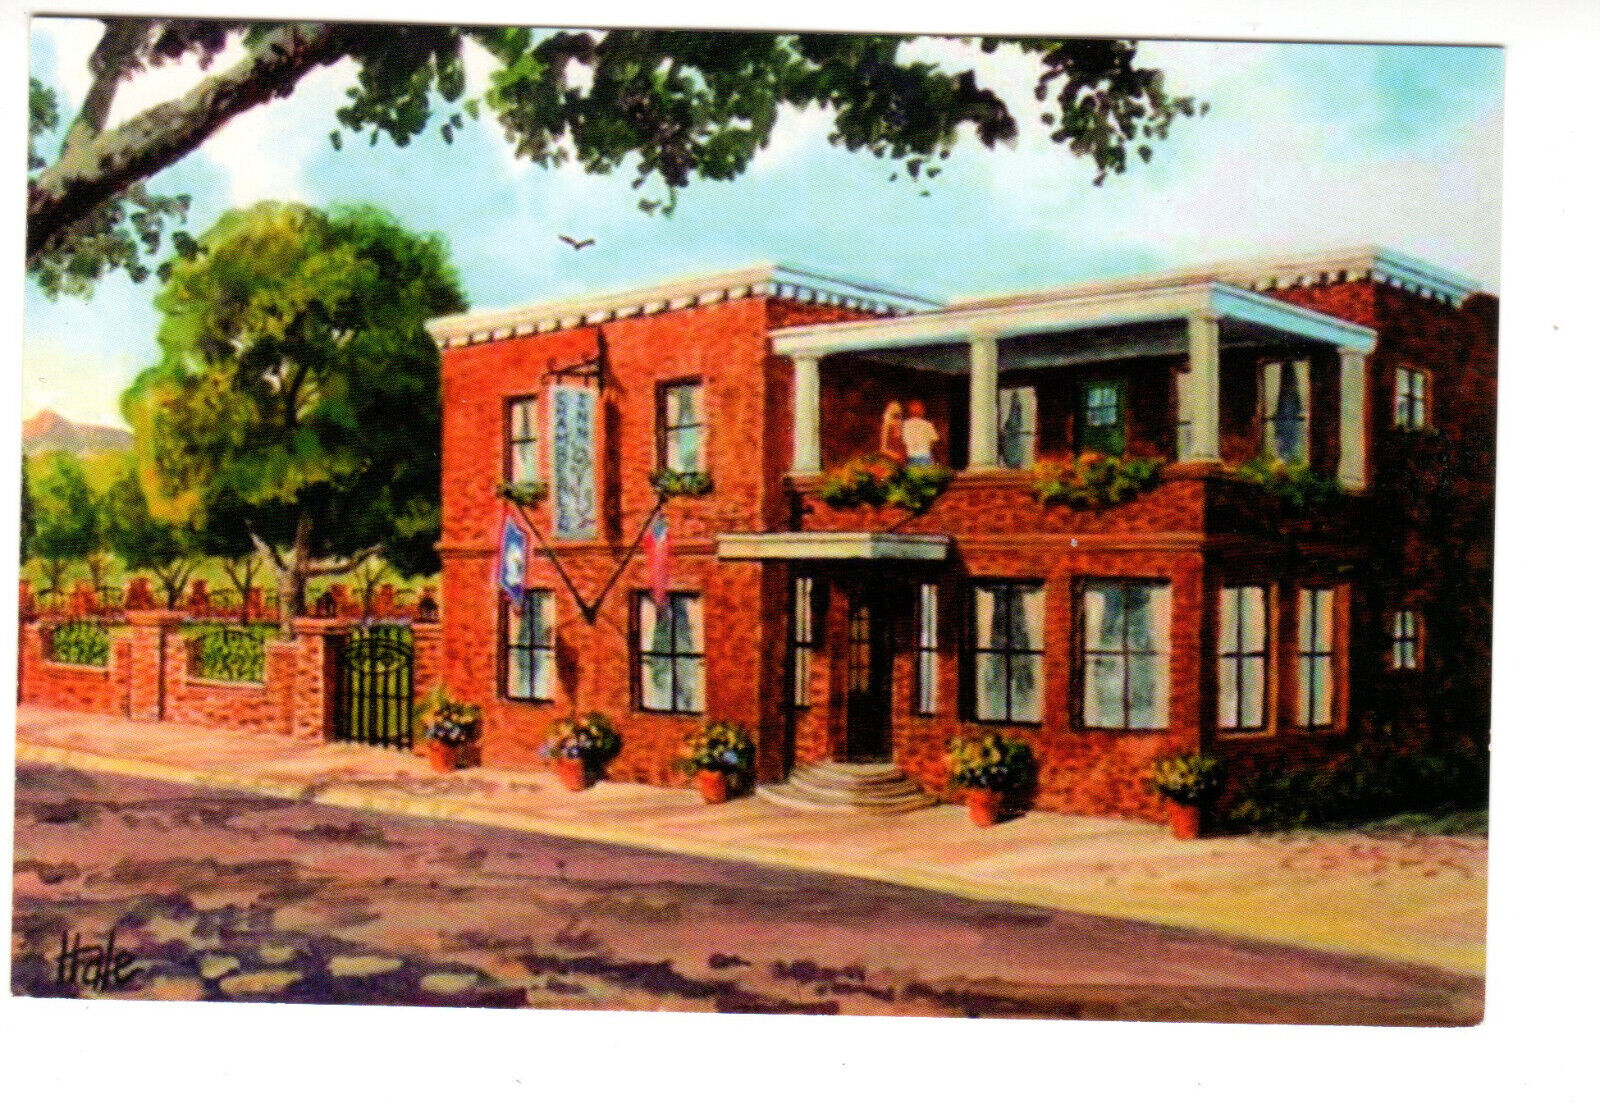 Artist Postcard: Chamberlin Inn, Cody, WY (Wyoming) - exterior view - by Hale